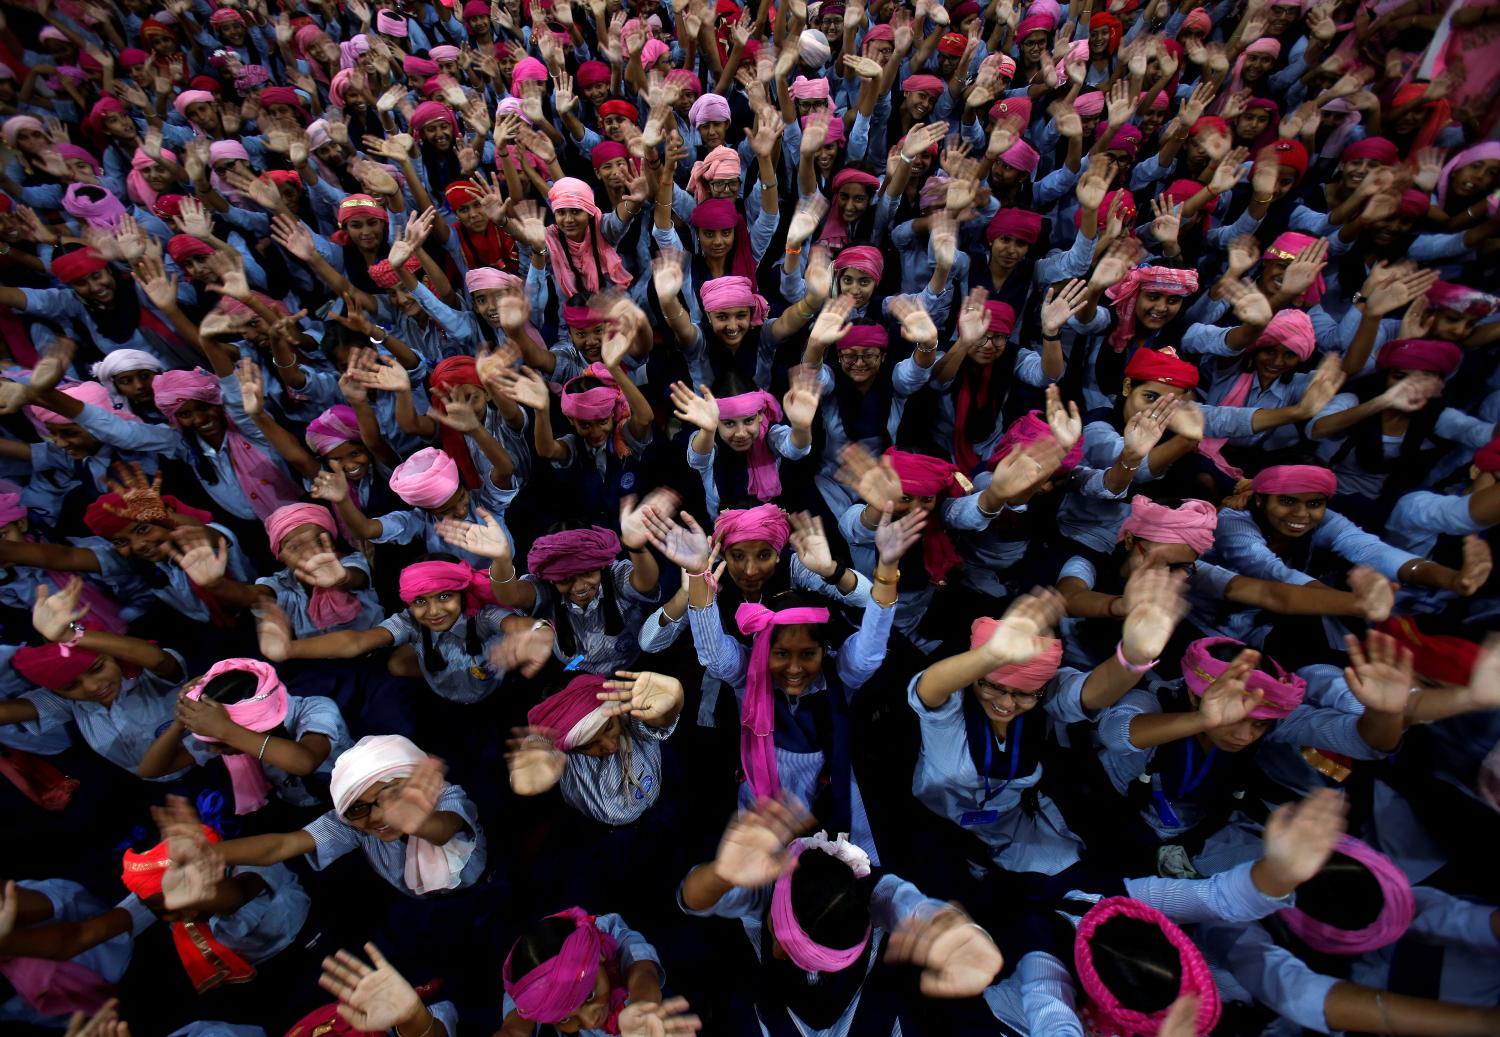 School girls wearing pink turbans wave during celebrations to mark International Day of the Girl Child 2018, at a school in Chandigarh, India October 11, 2018. REUTERS/Ajay Verma     TPX IMAGES OF THE DAY - RC1336C3B510